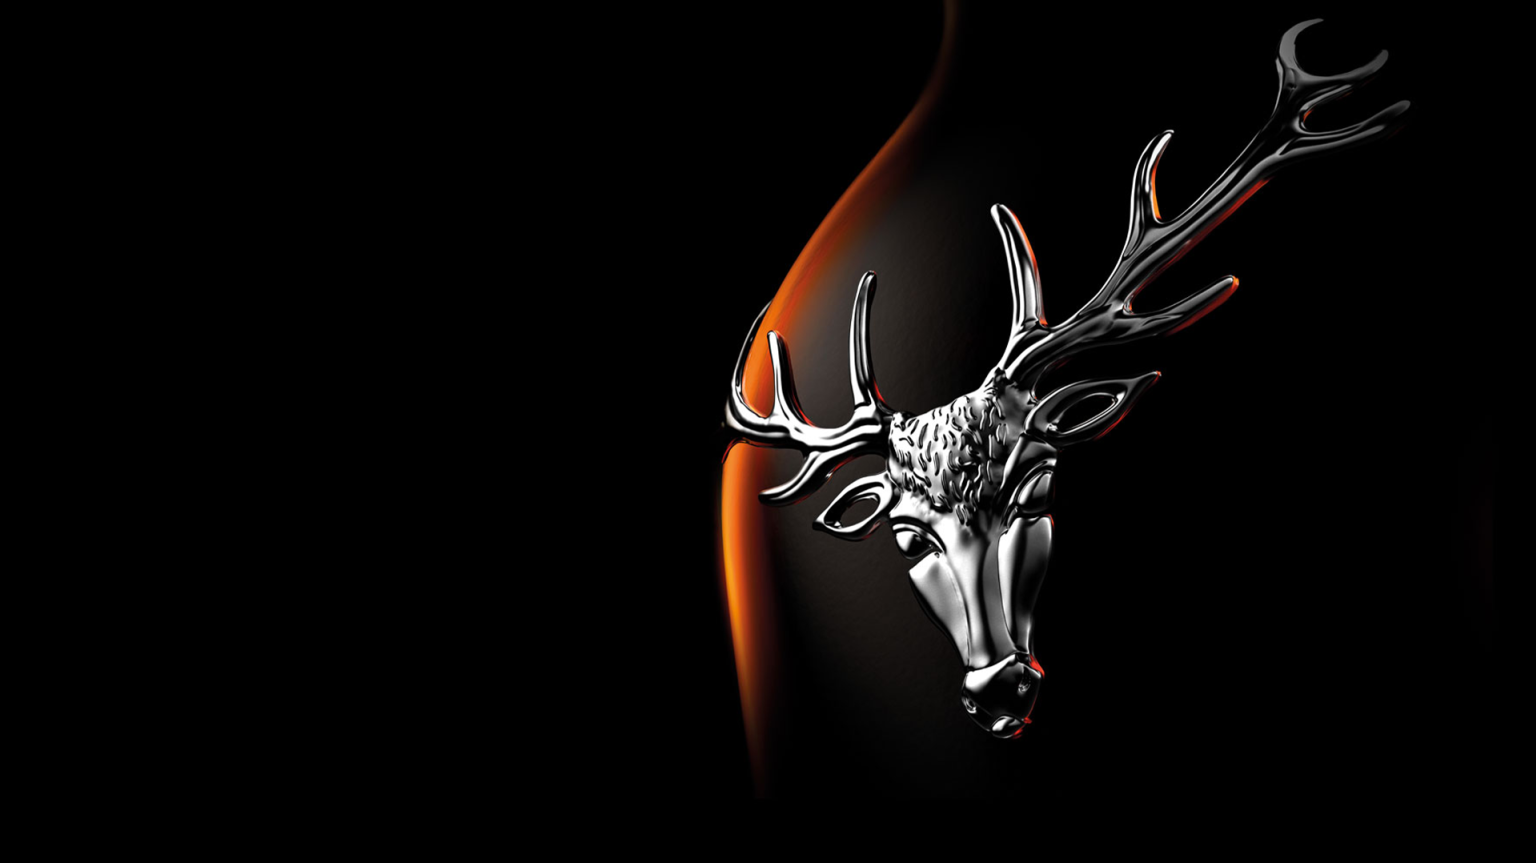 Notes from our Dalmore Distillery visit